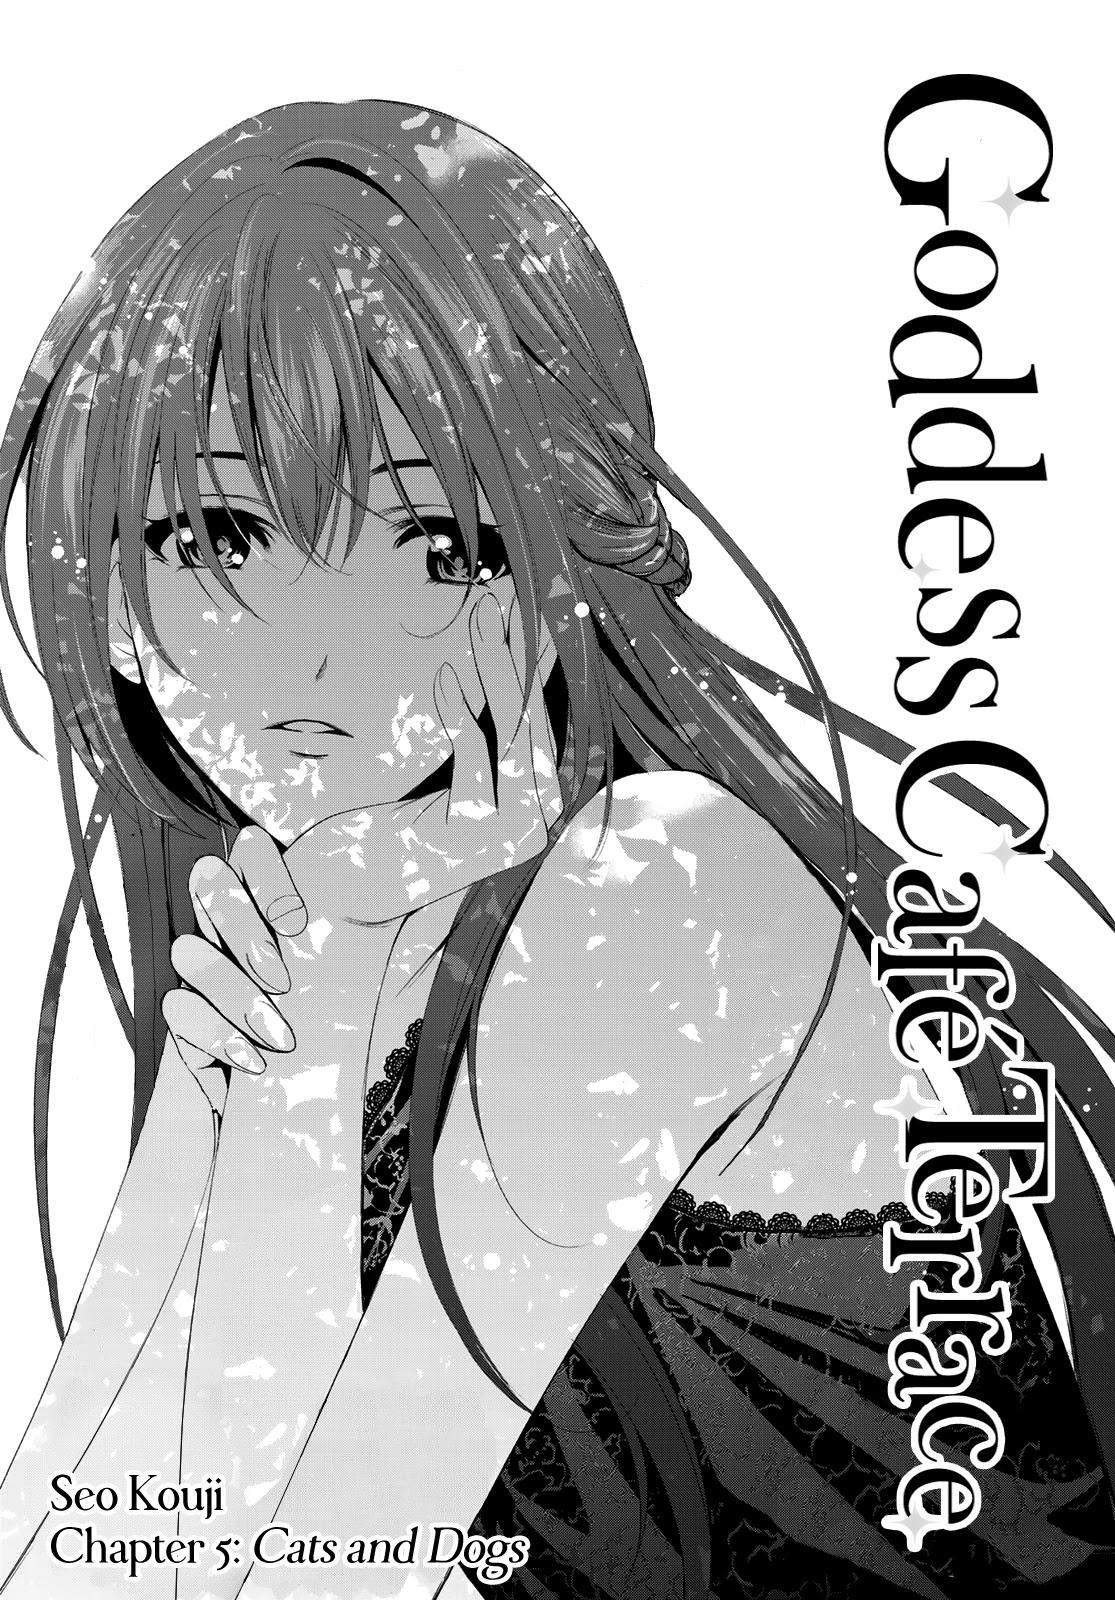 Read Megami no Cafe Terrace Manga Chapter 90 in English Free Online